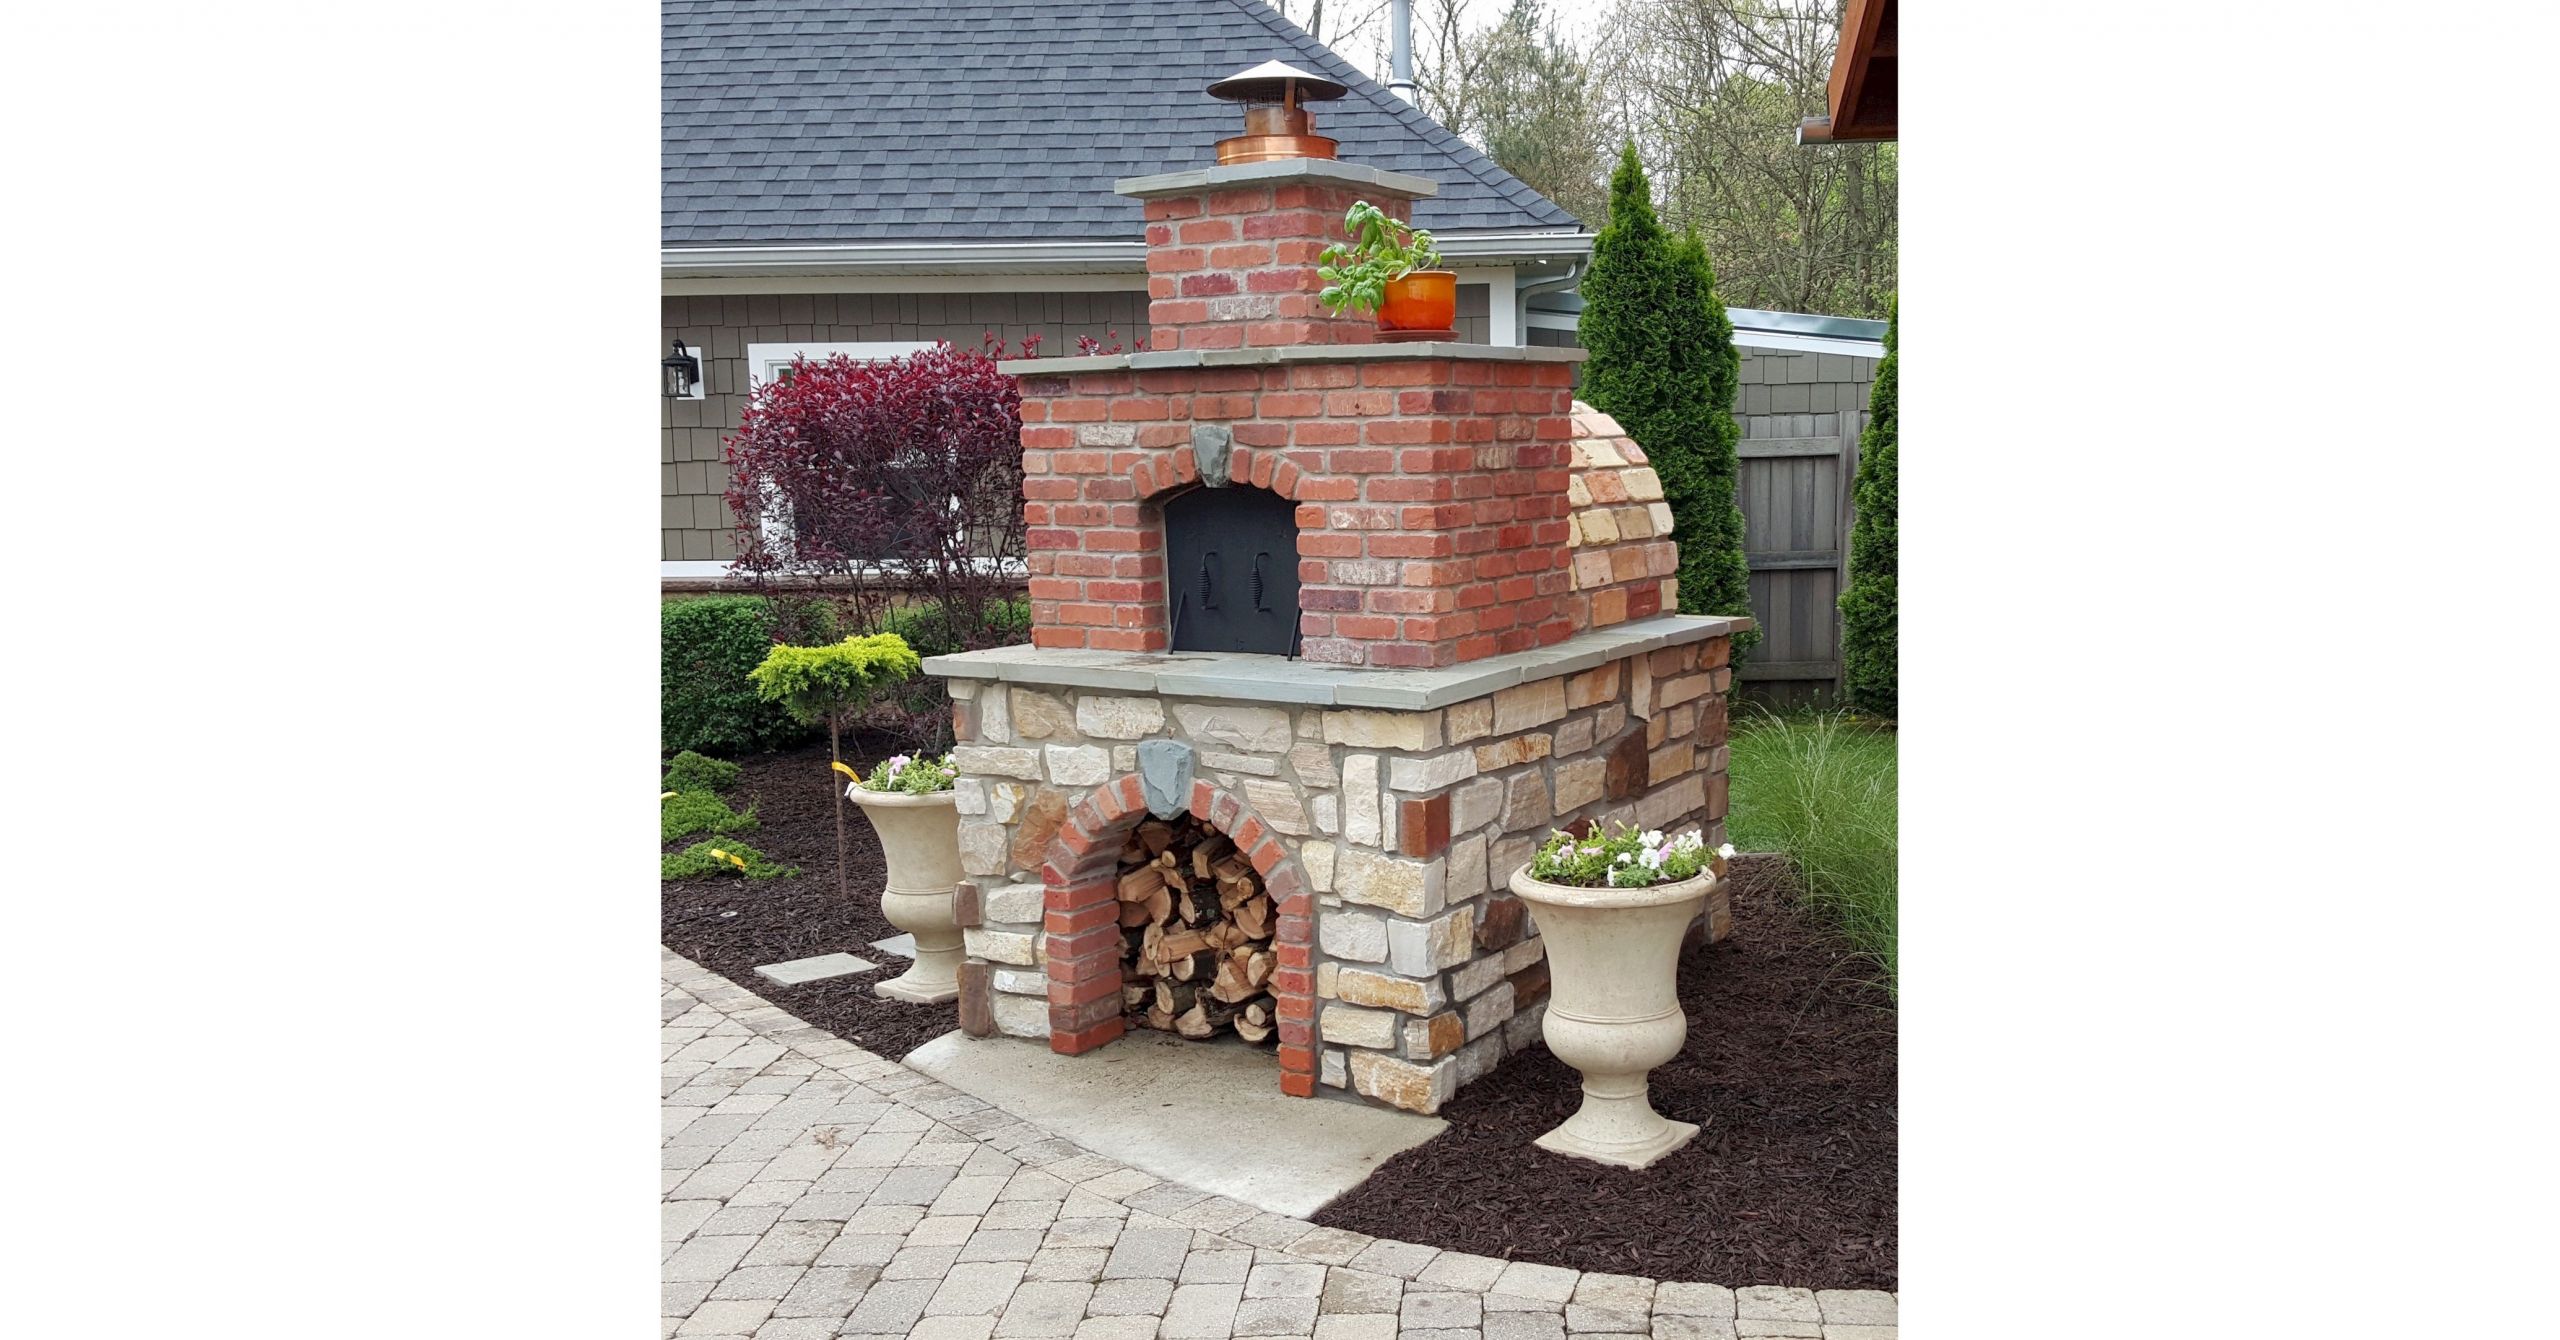 DIY Outdoor Oven
 DIY Wood Fired Outdoor Brick Pizza Ovens Are Not ly Easy